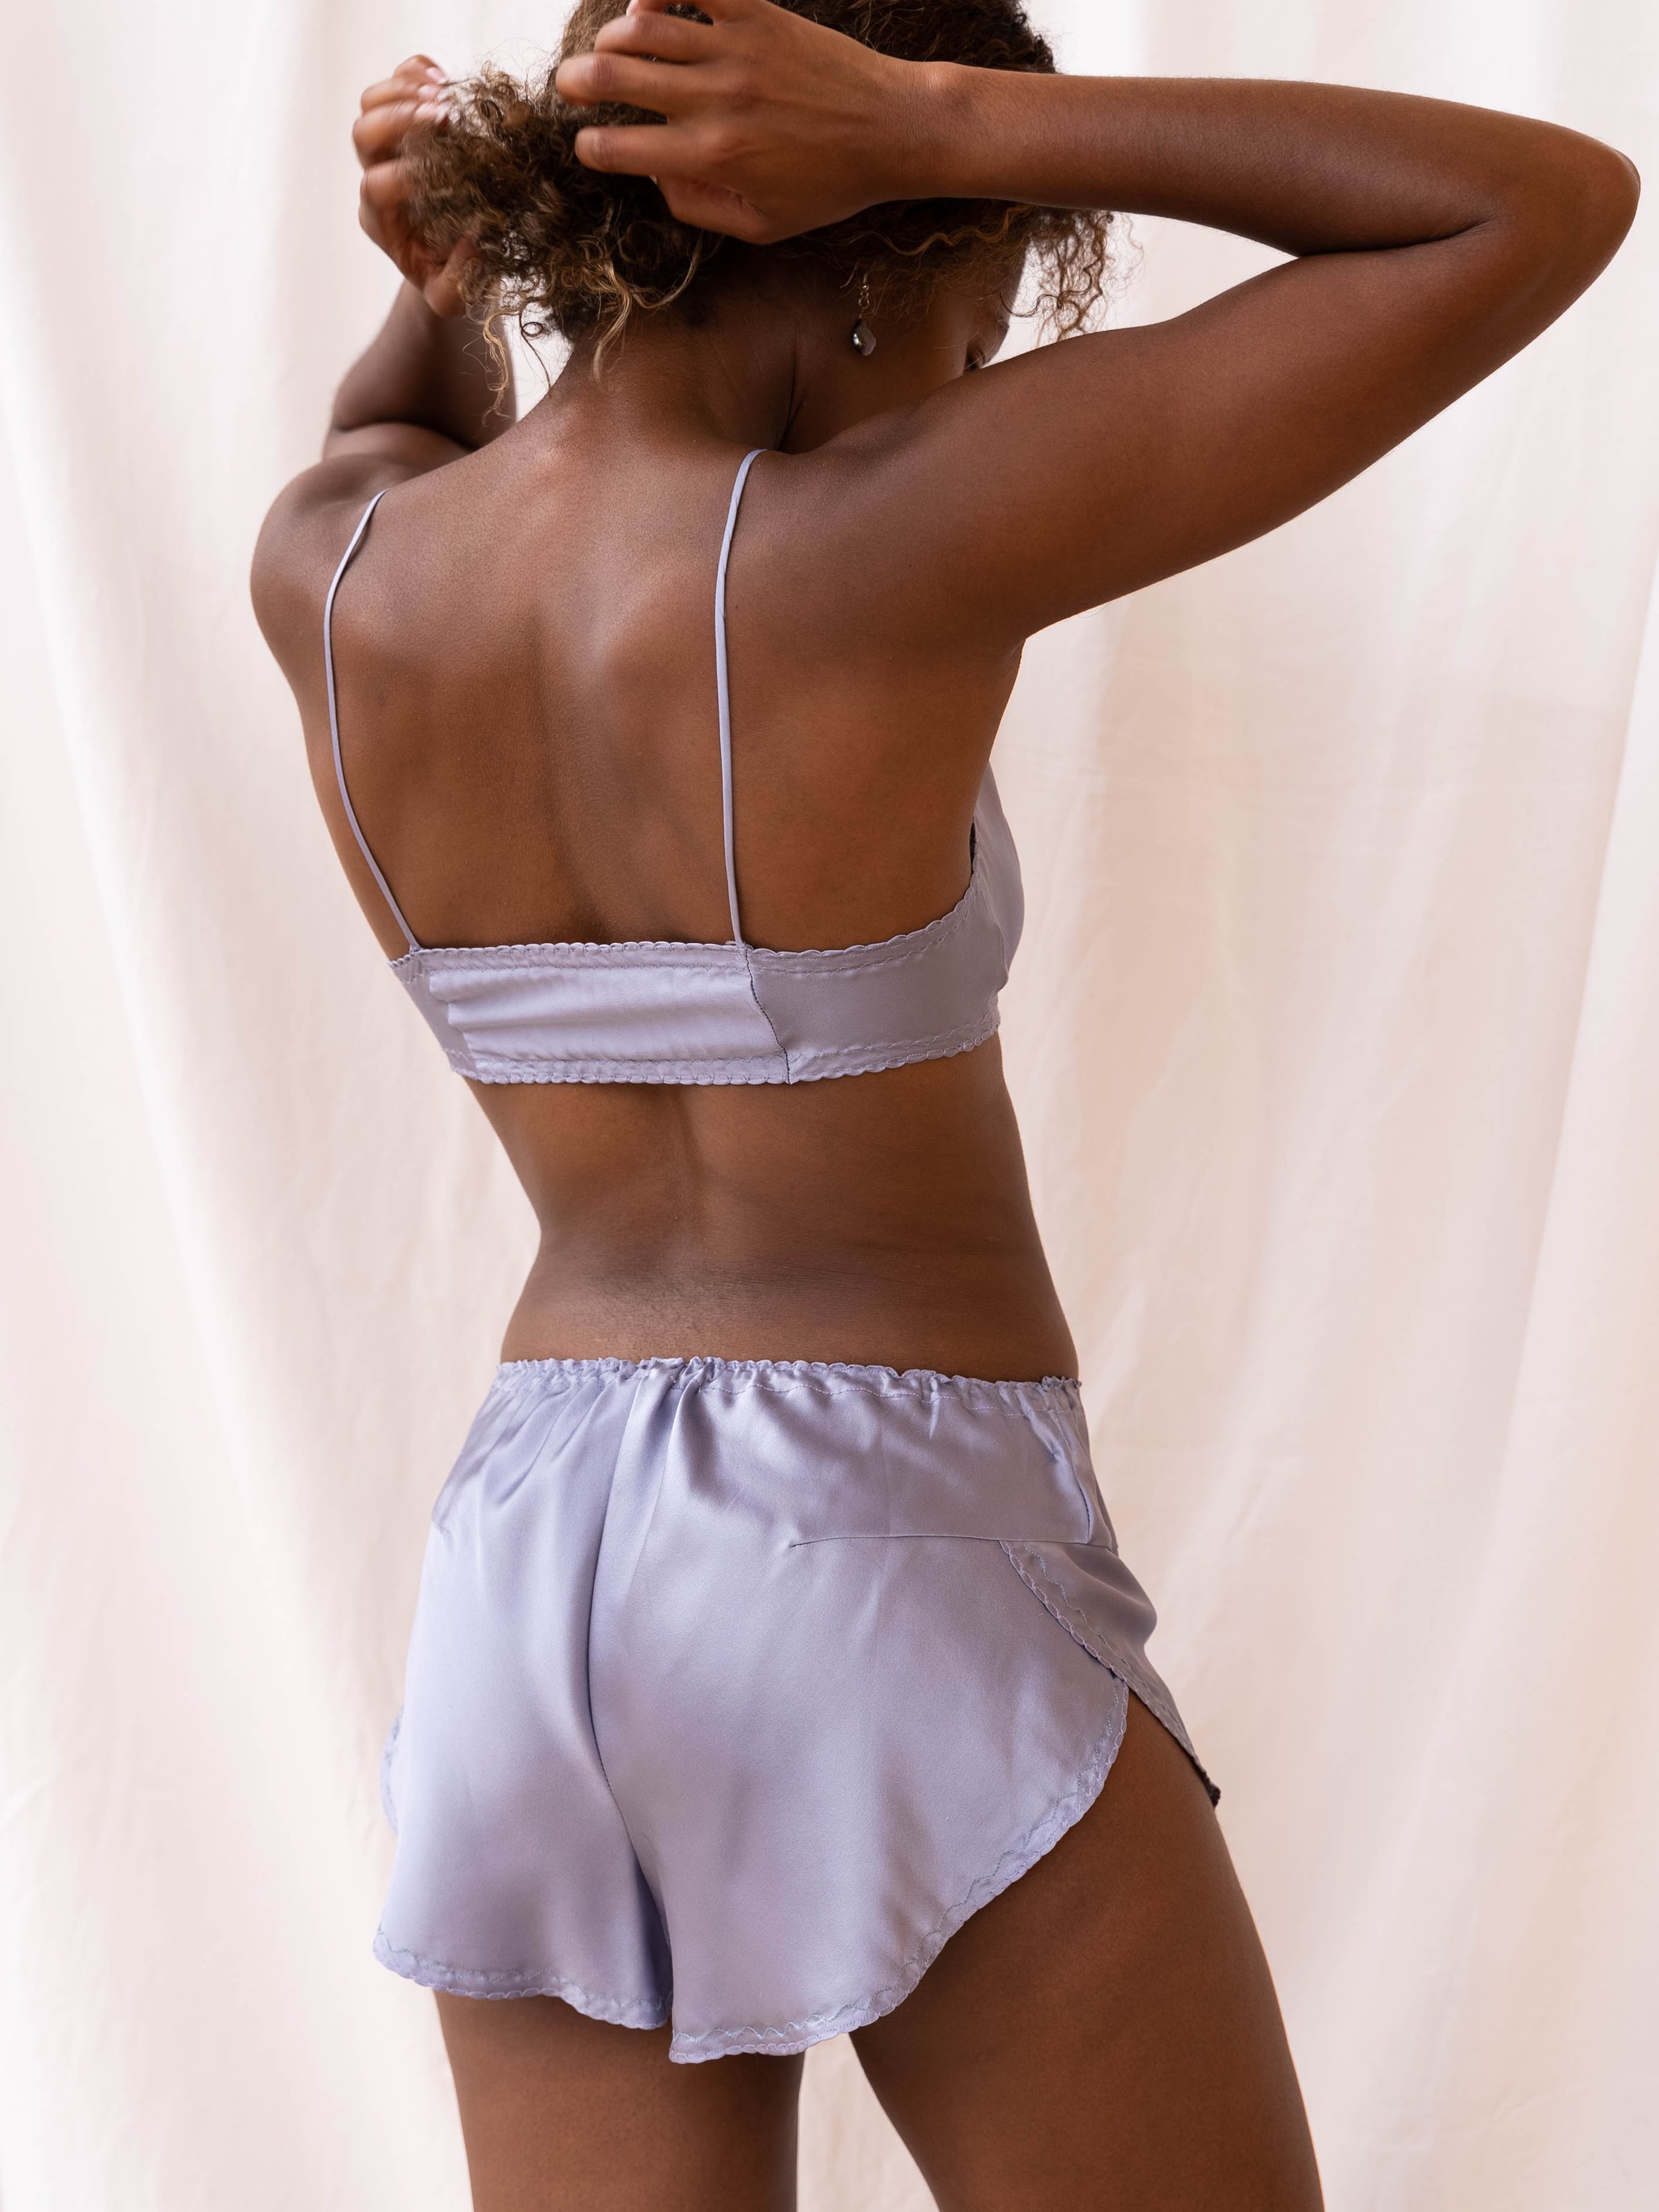 Oleata Myrtle back view bralette and Thong.jpg